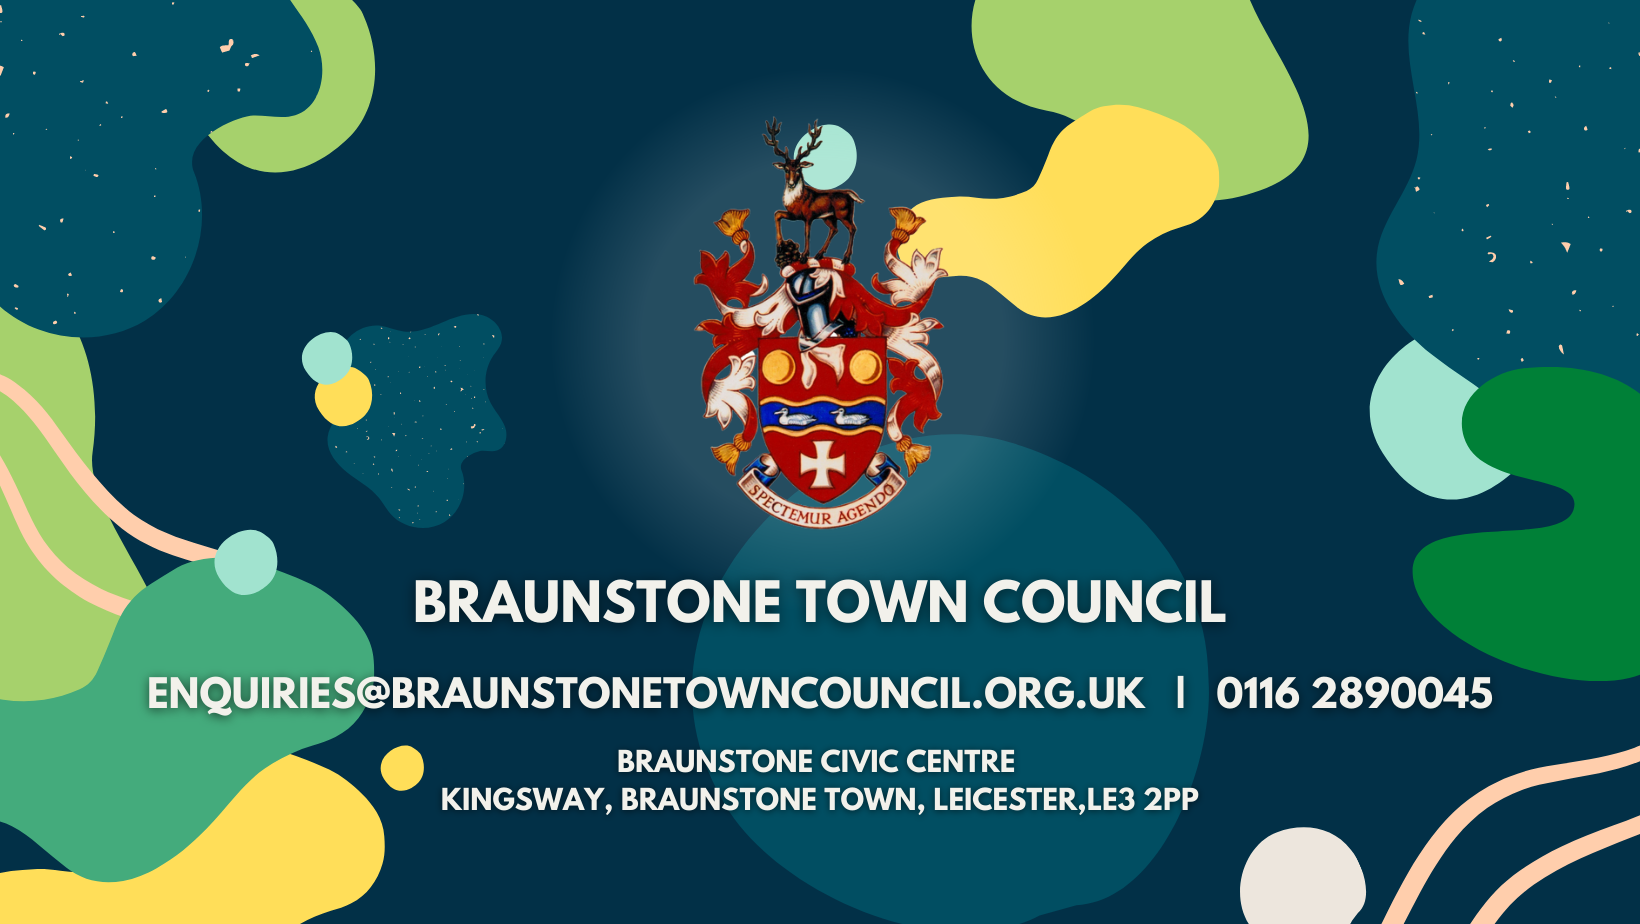 Braunstone Town Council